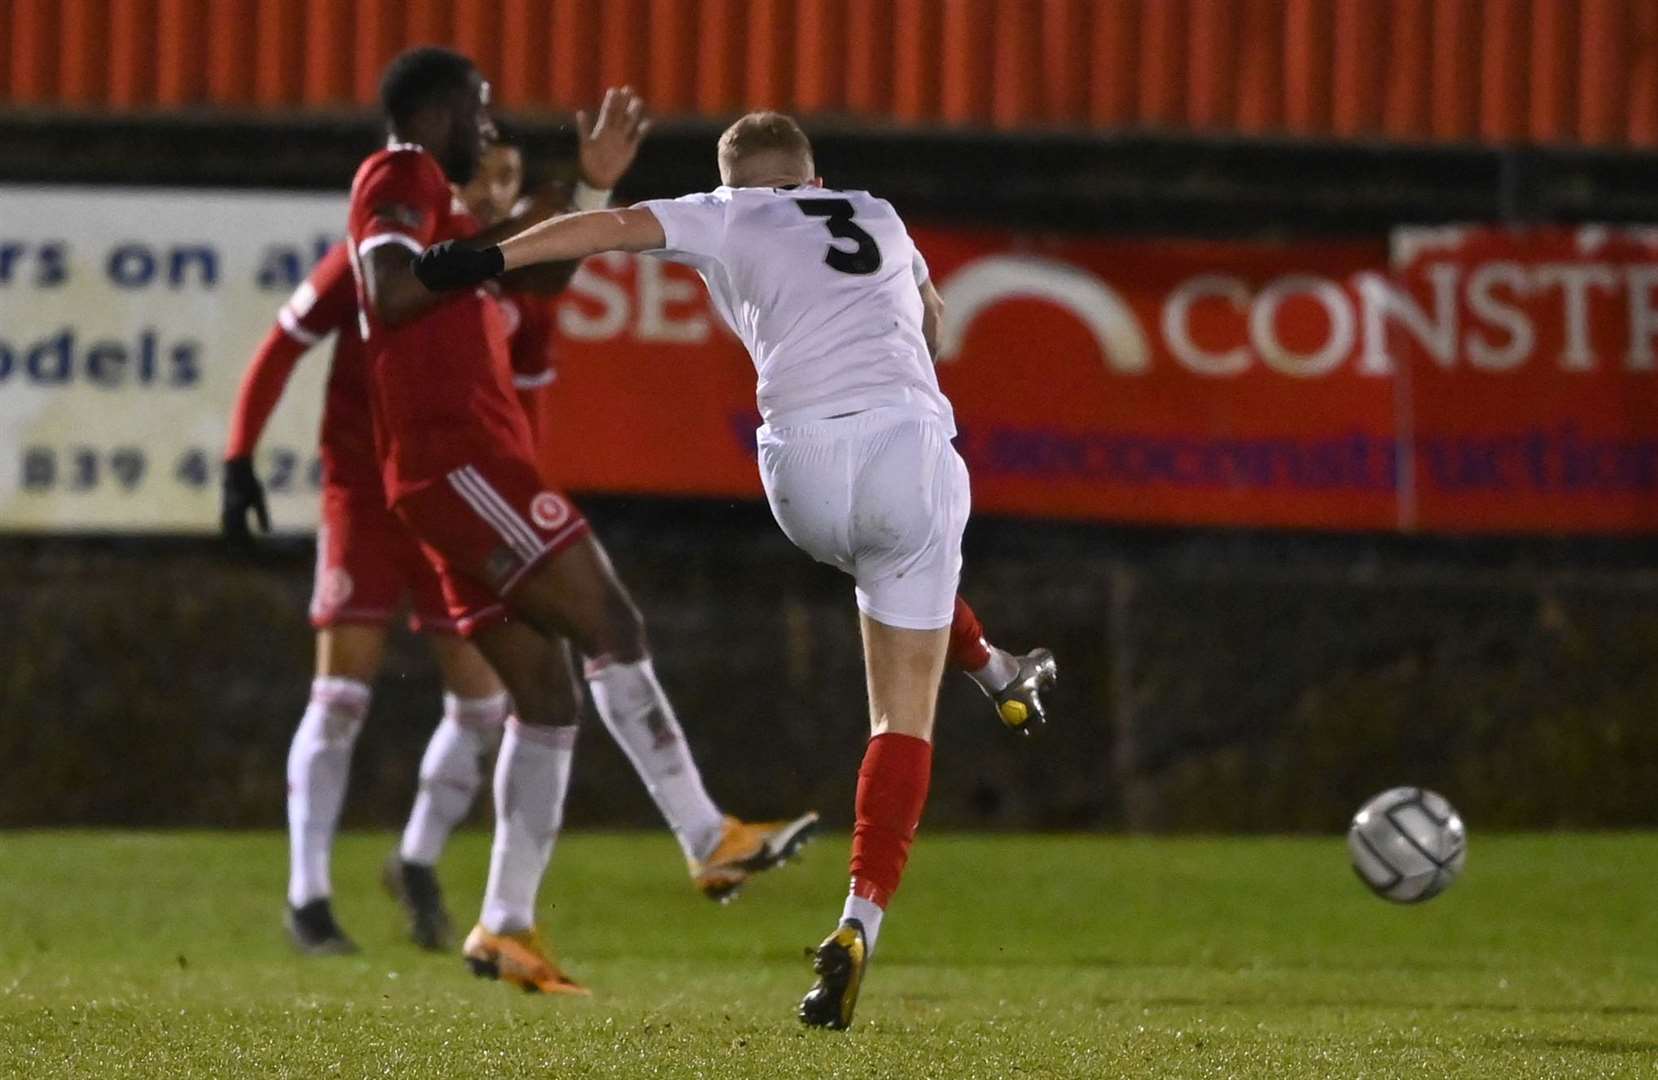 Bobby-Joe Taylor equalises in the first half for Ebbsfleet. Picture: Keith Gillard